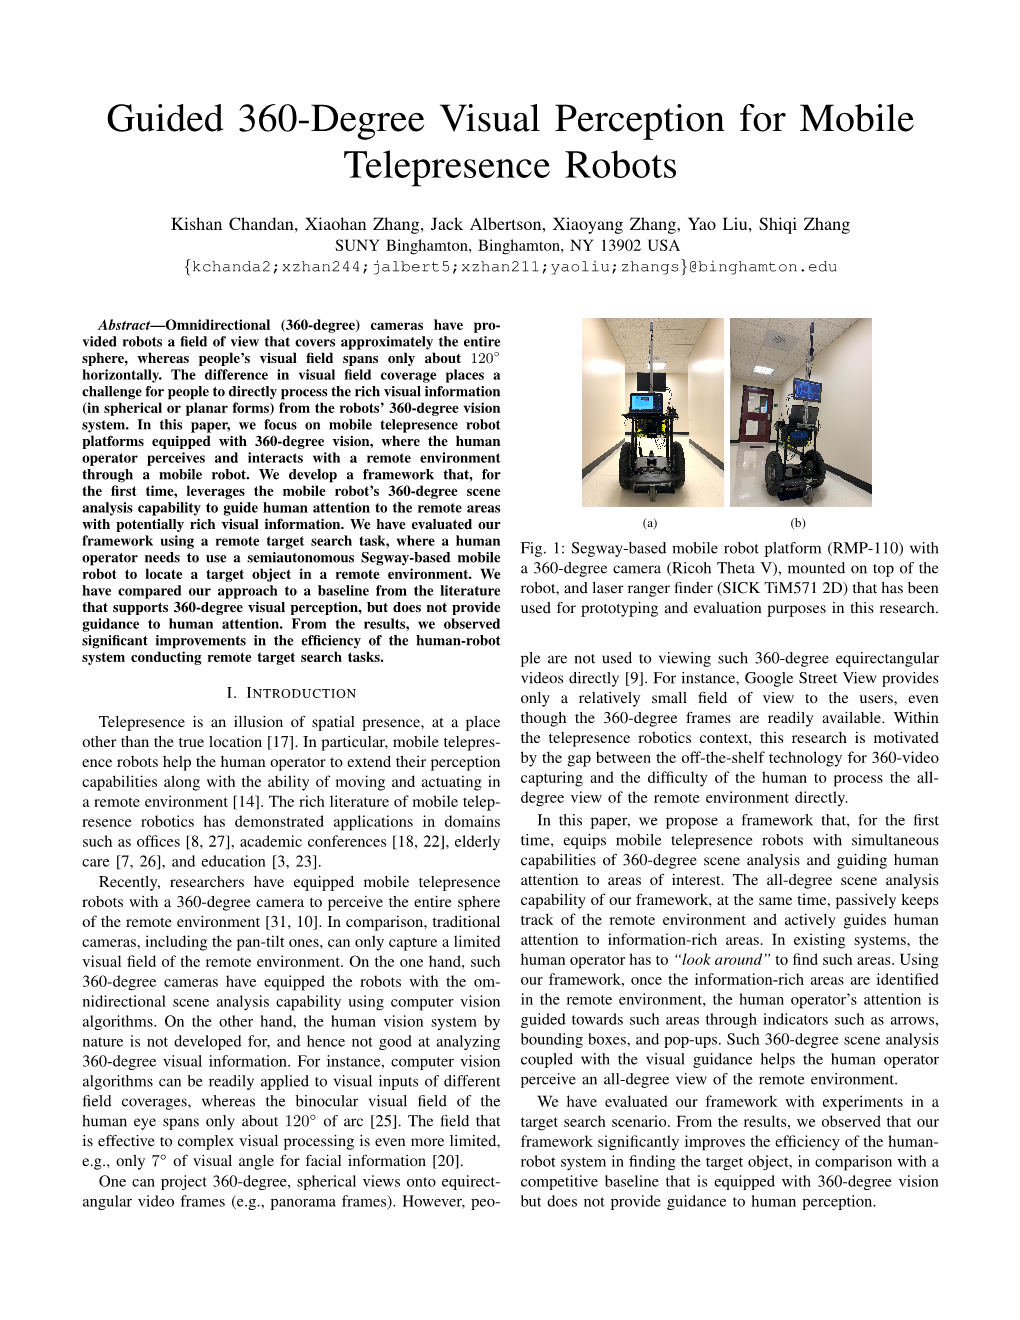 Guided 360-Degree Visual Perception for Mobile Telepresence Robots